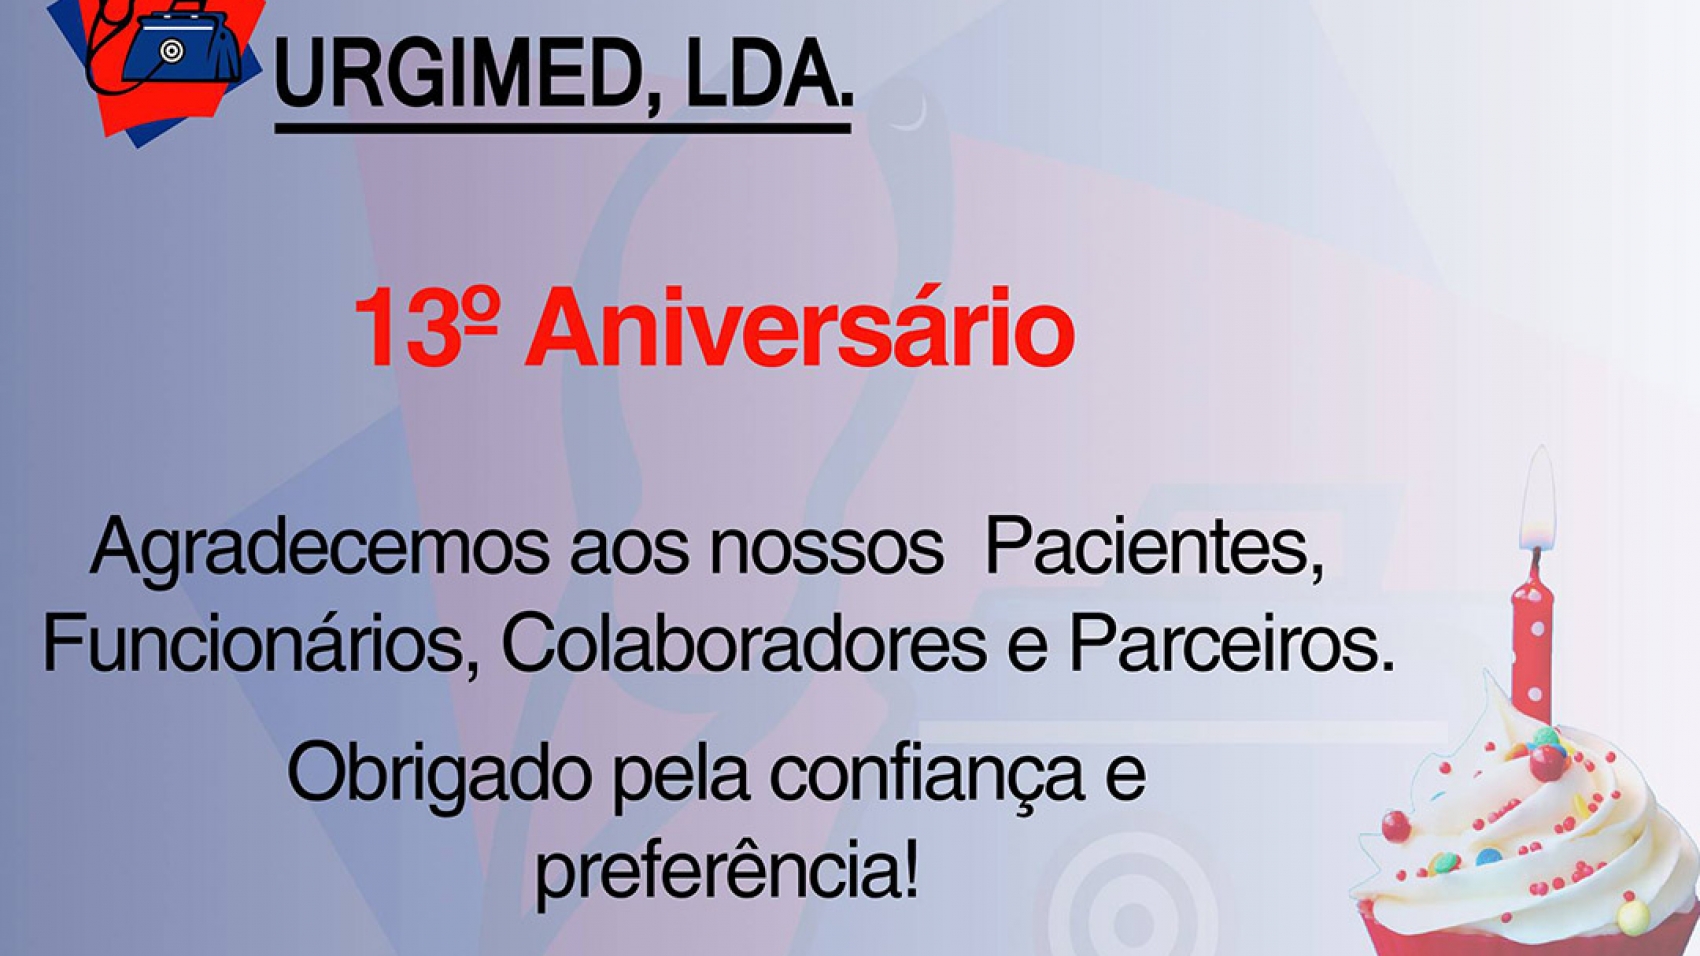 urgimed-13th